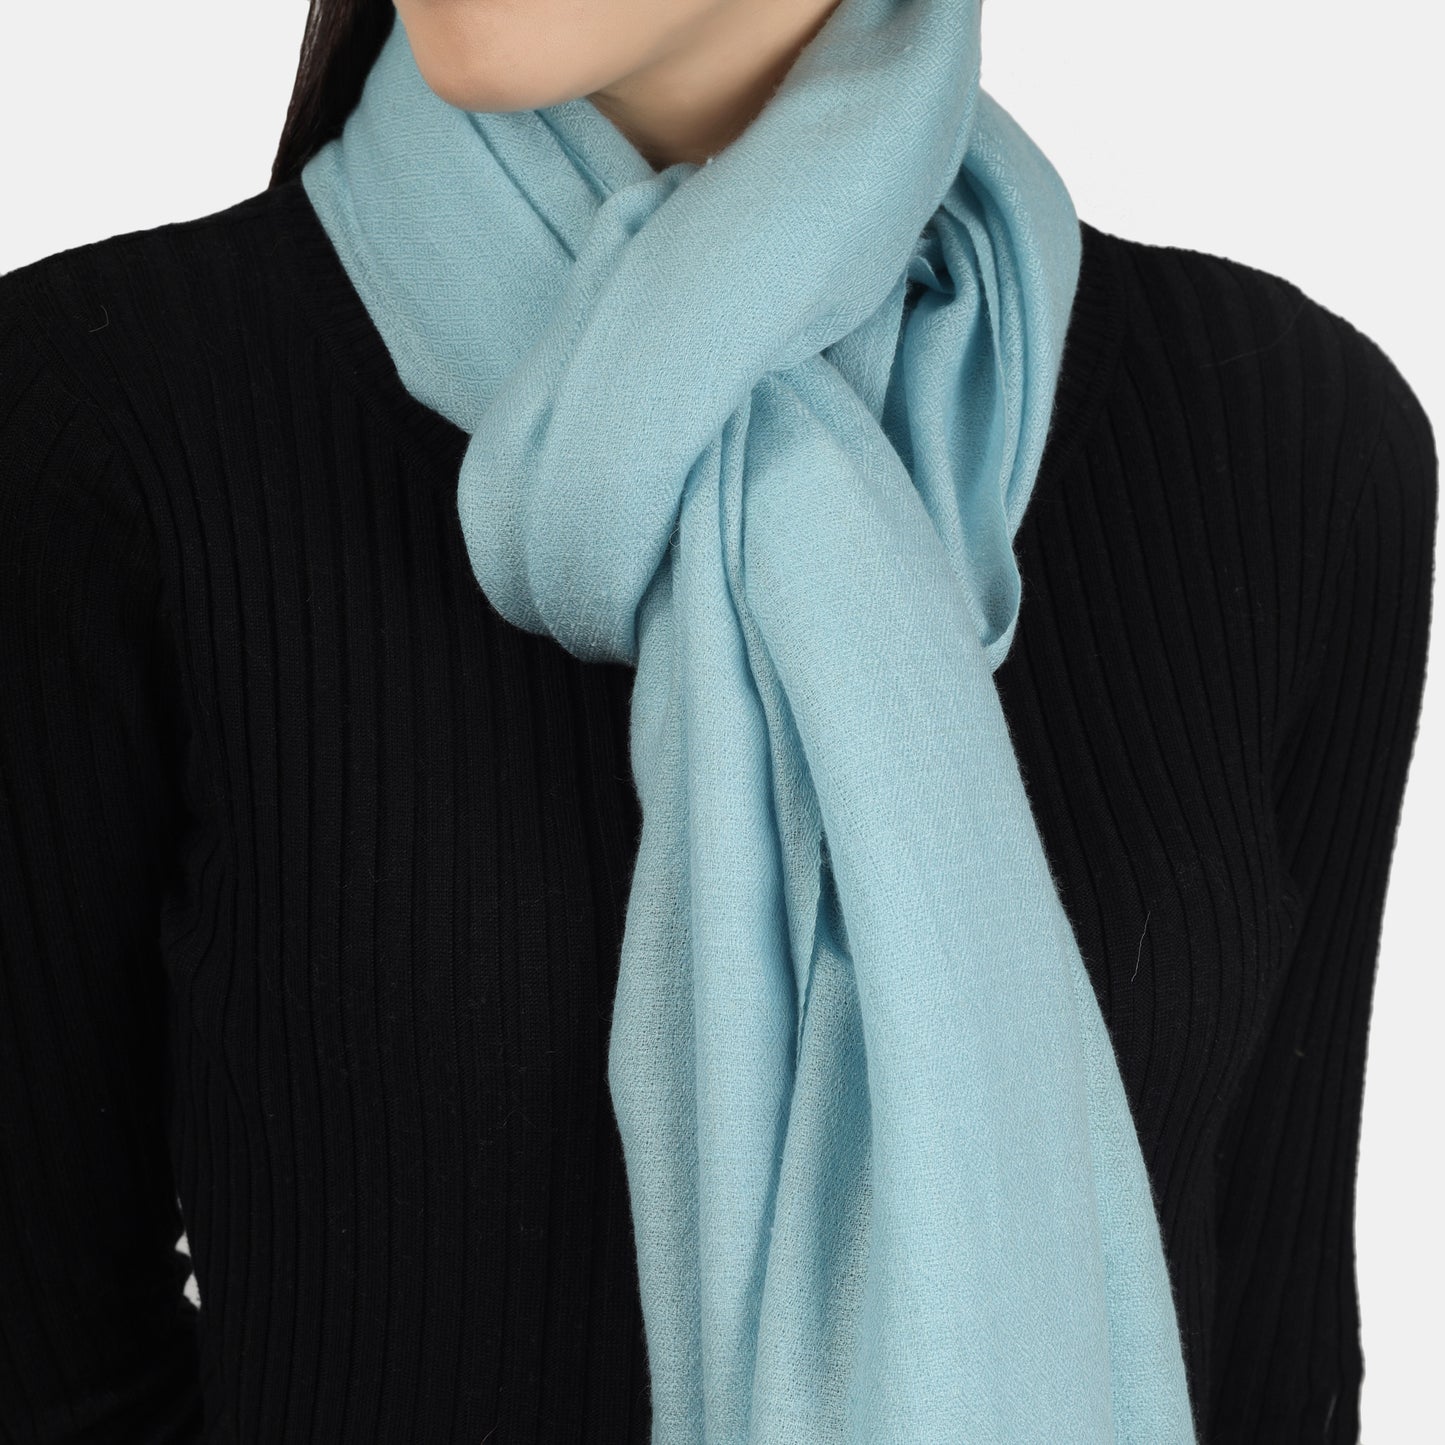 Cashmere Scarf Handwoven (Turquoise)